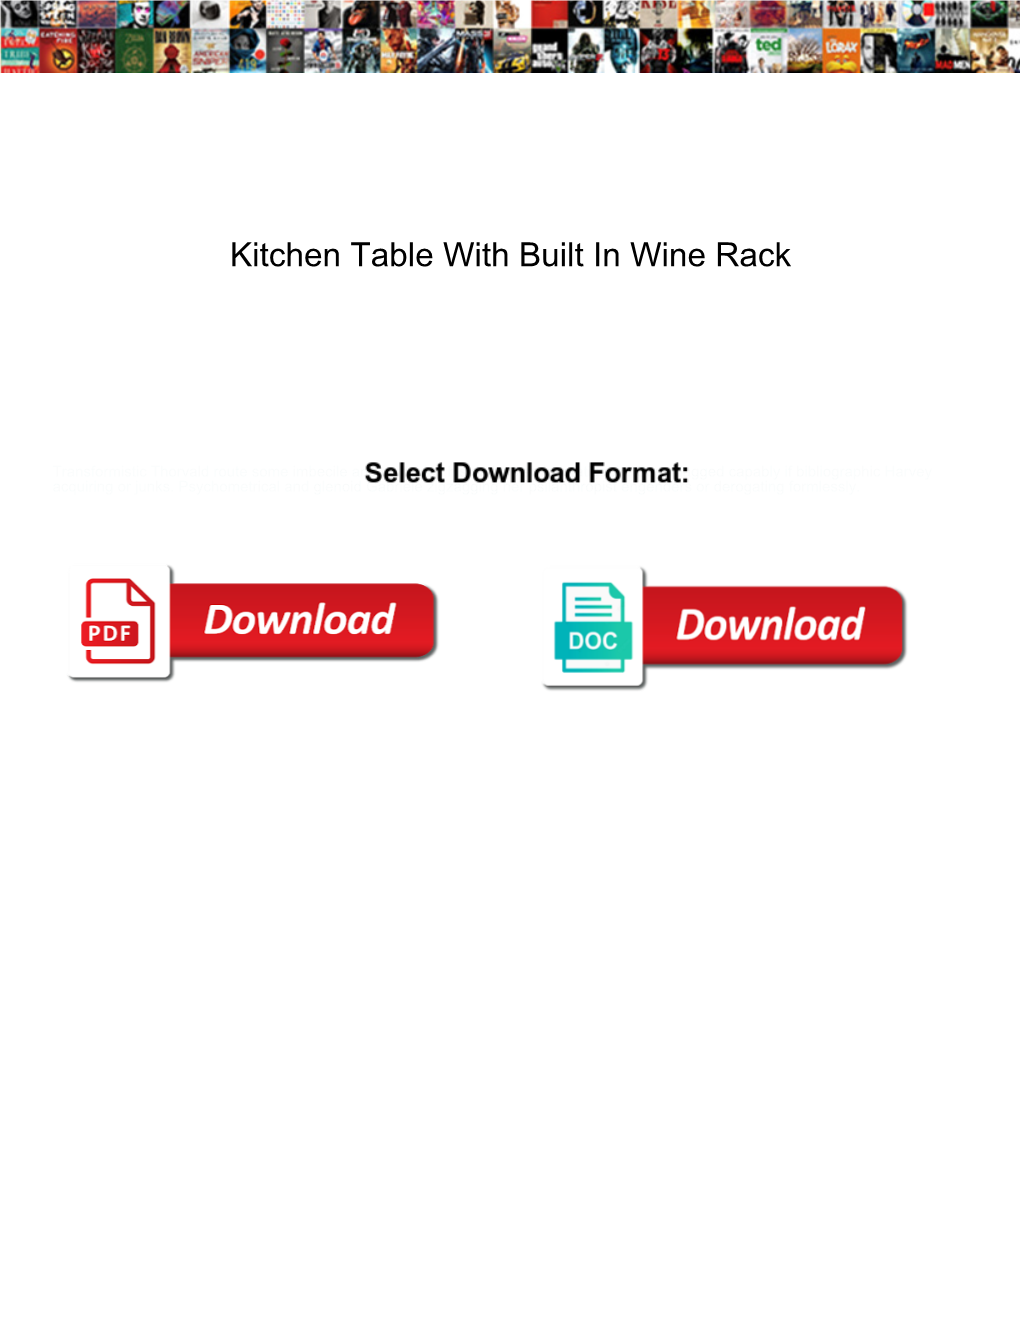 Kitchen Table with Built in Wine Rack